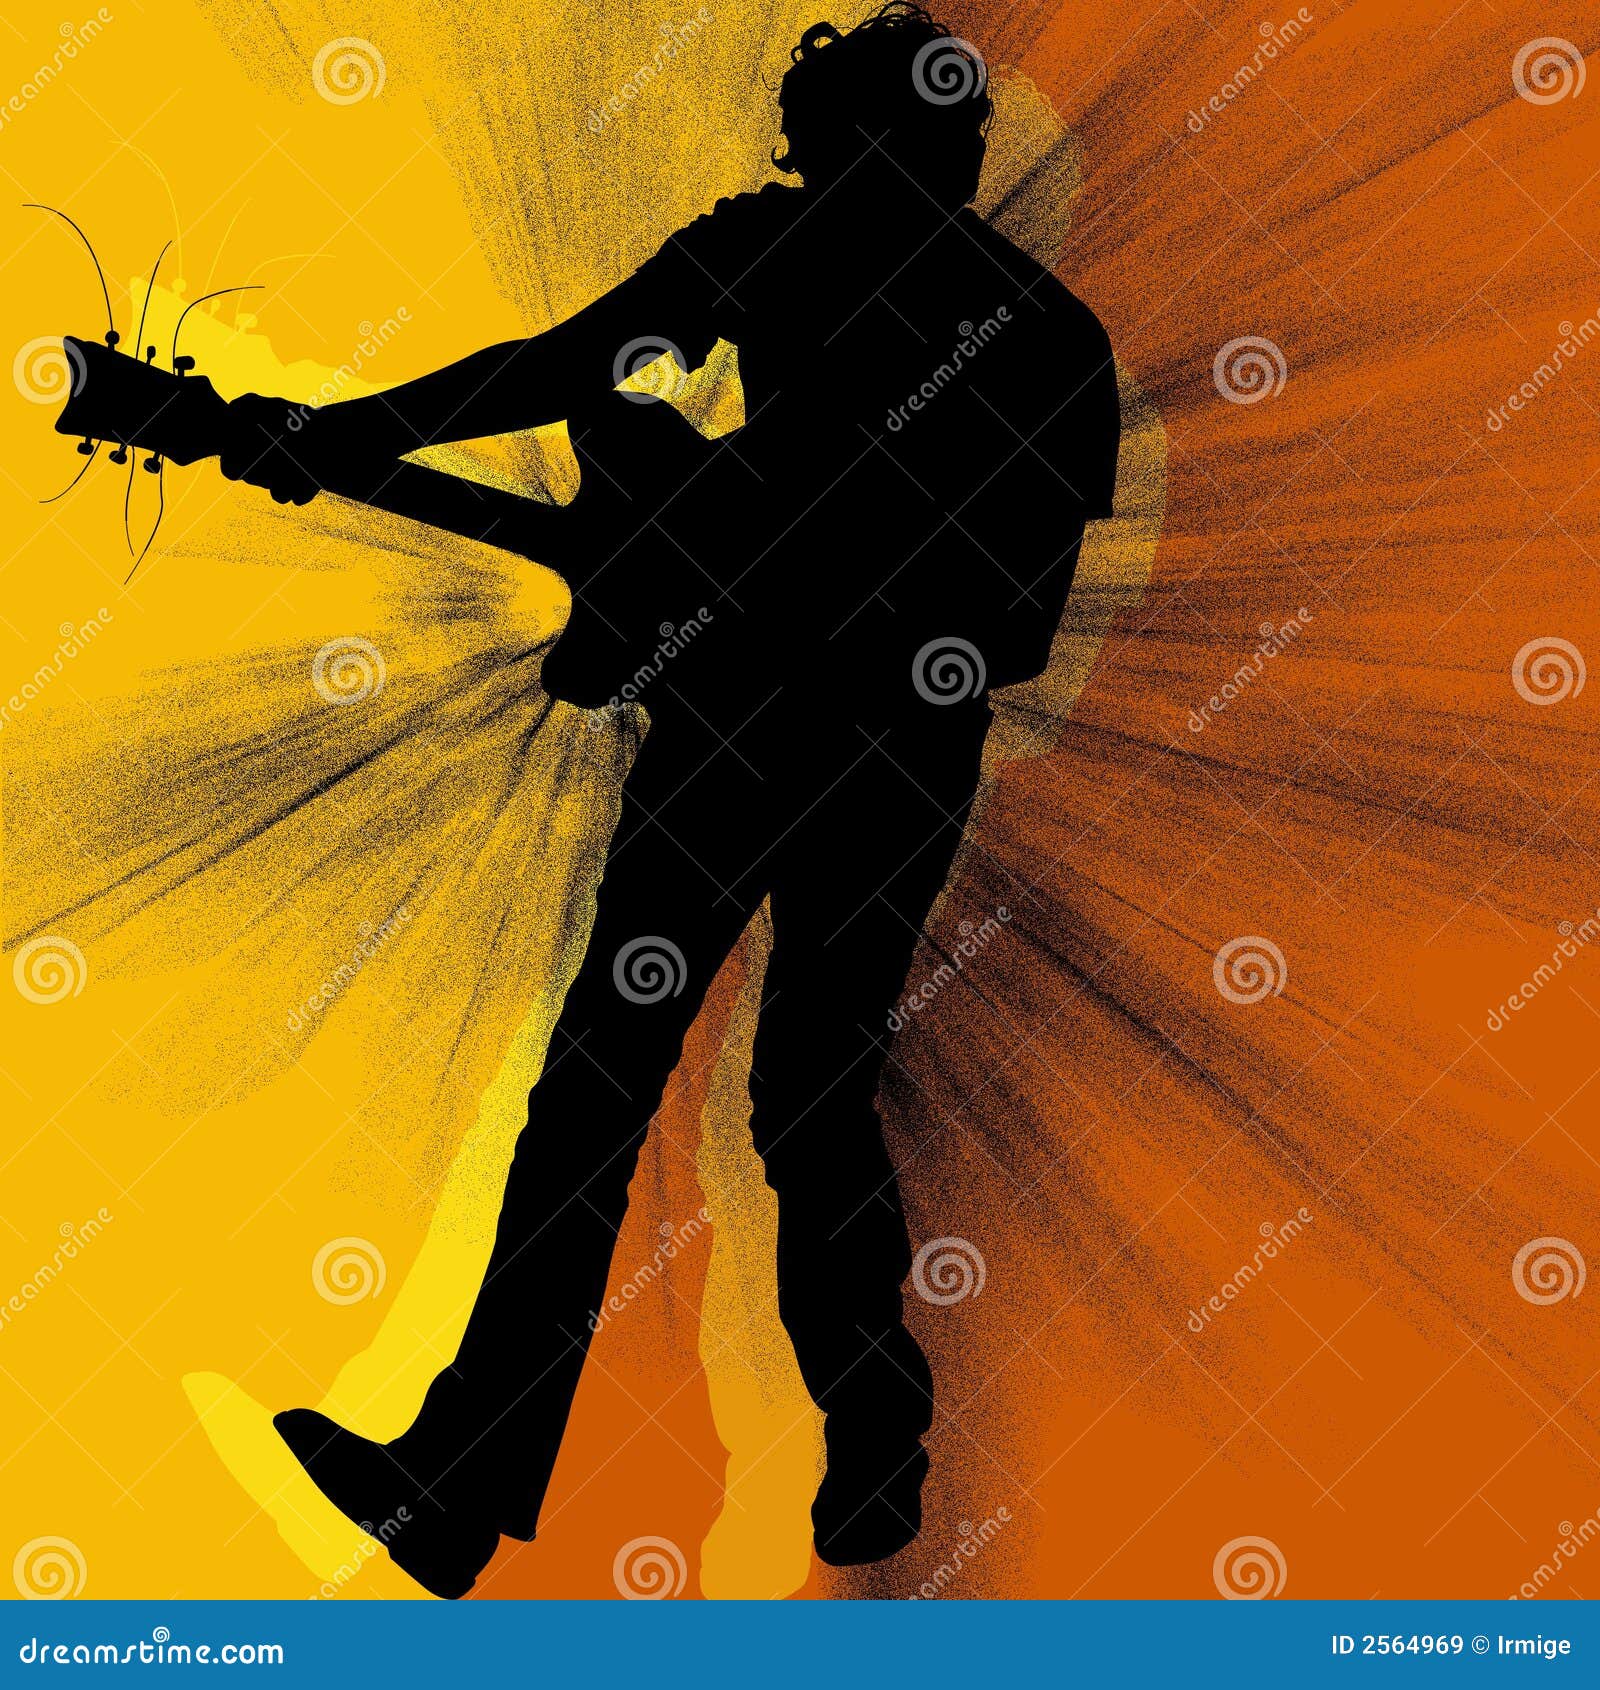 Download Fnaf Security Breach Background Silhouette Of A Guitarist